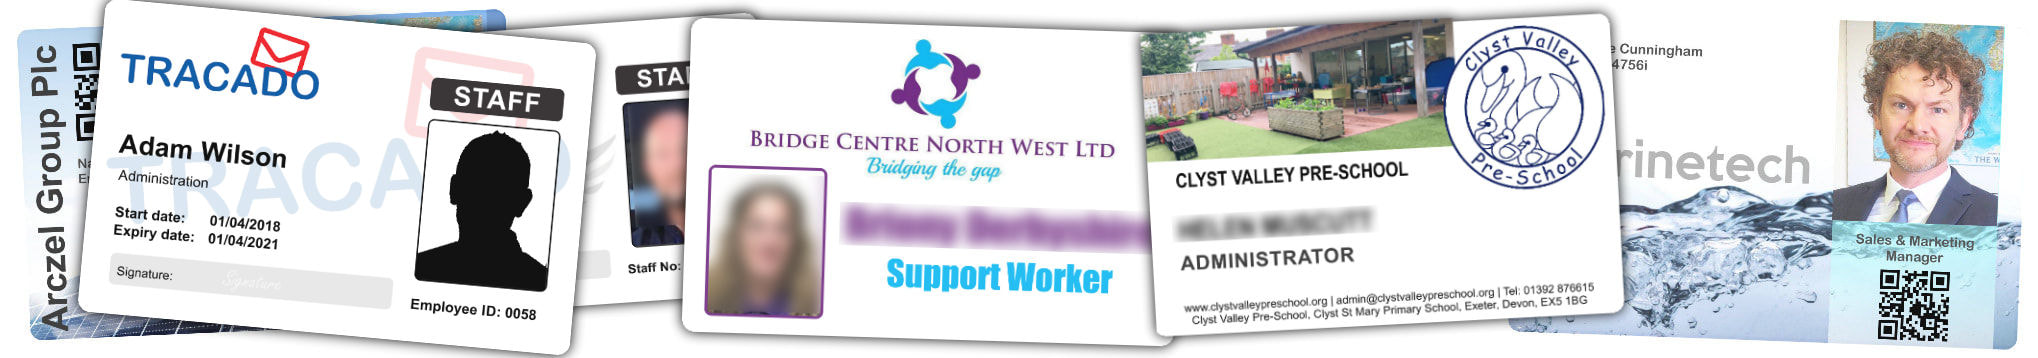 Poole examples of staff photo ID cards | samples of employee Identity card printing | Workers ID cards printed in 